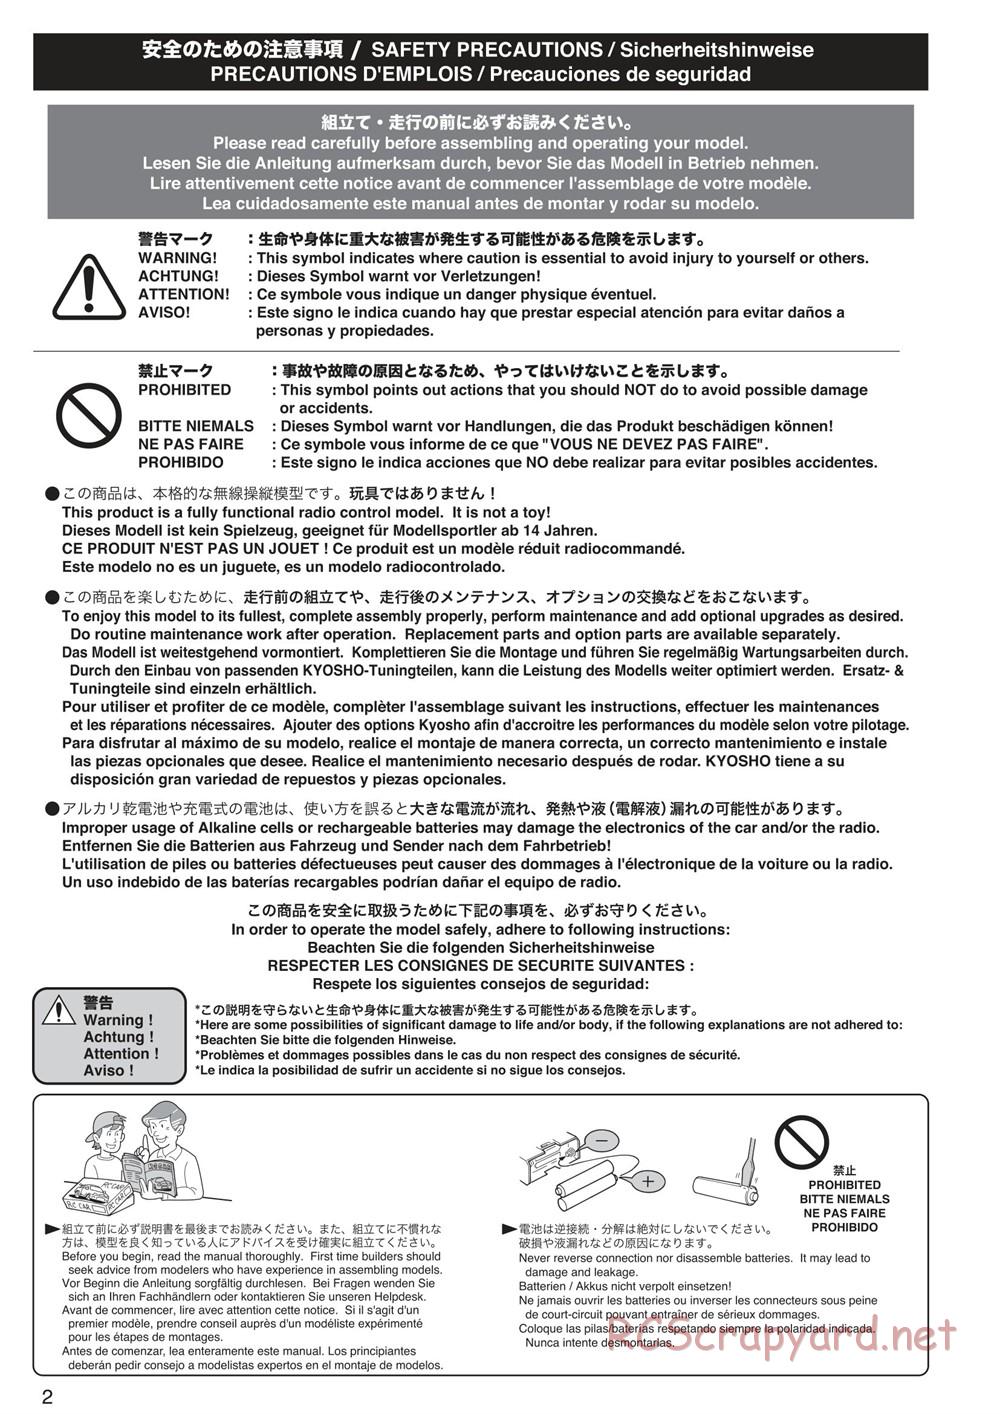 Kyosho - Mad Crusher - Manual - Page 2